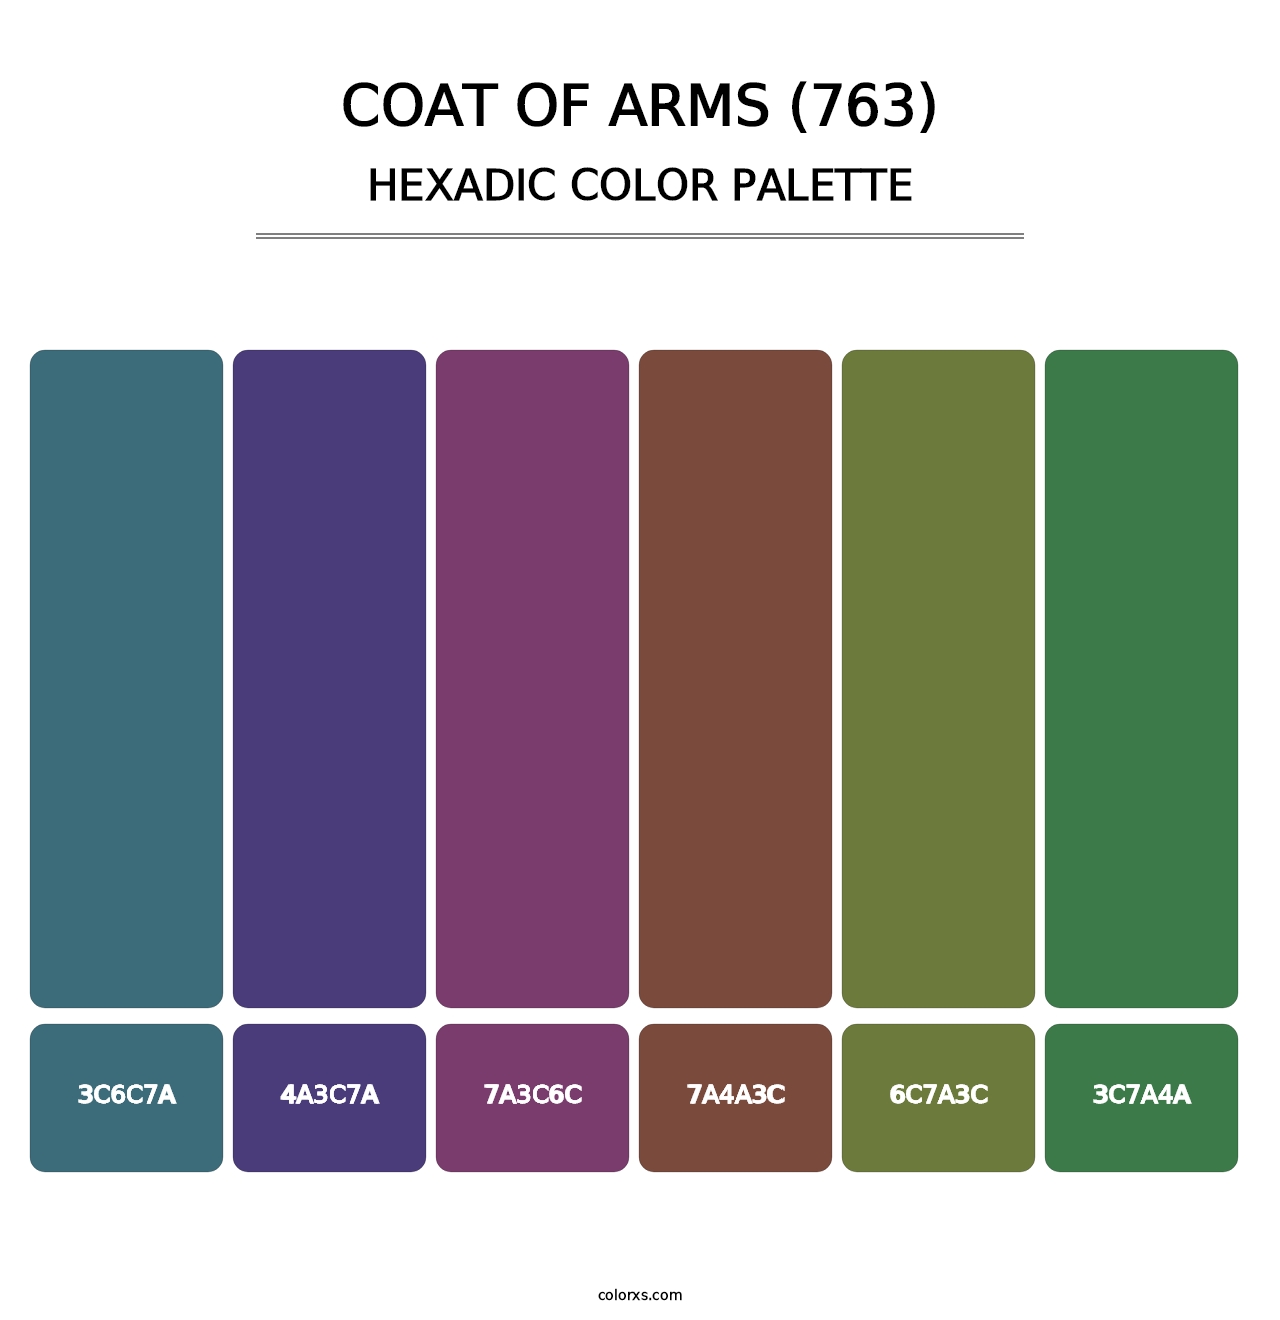 Coat of Arms (763) - Hexadic Color Palette